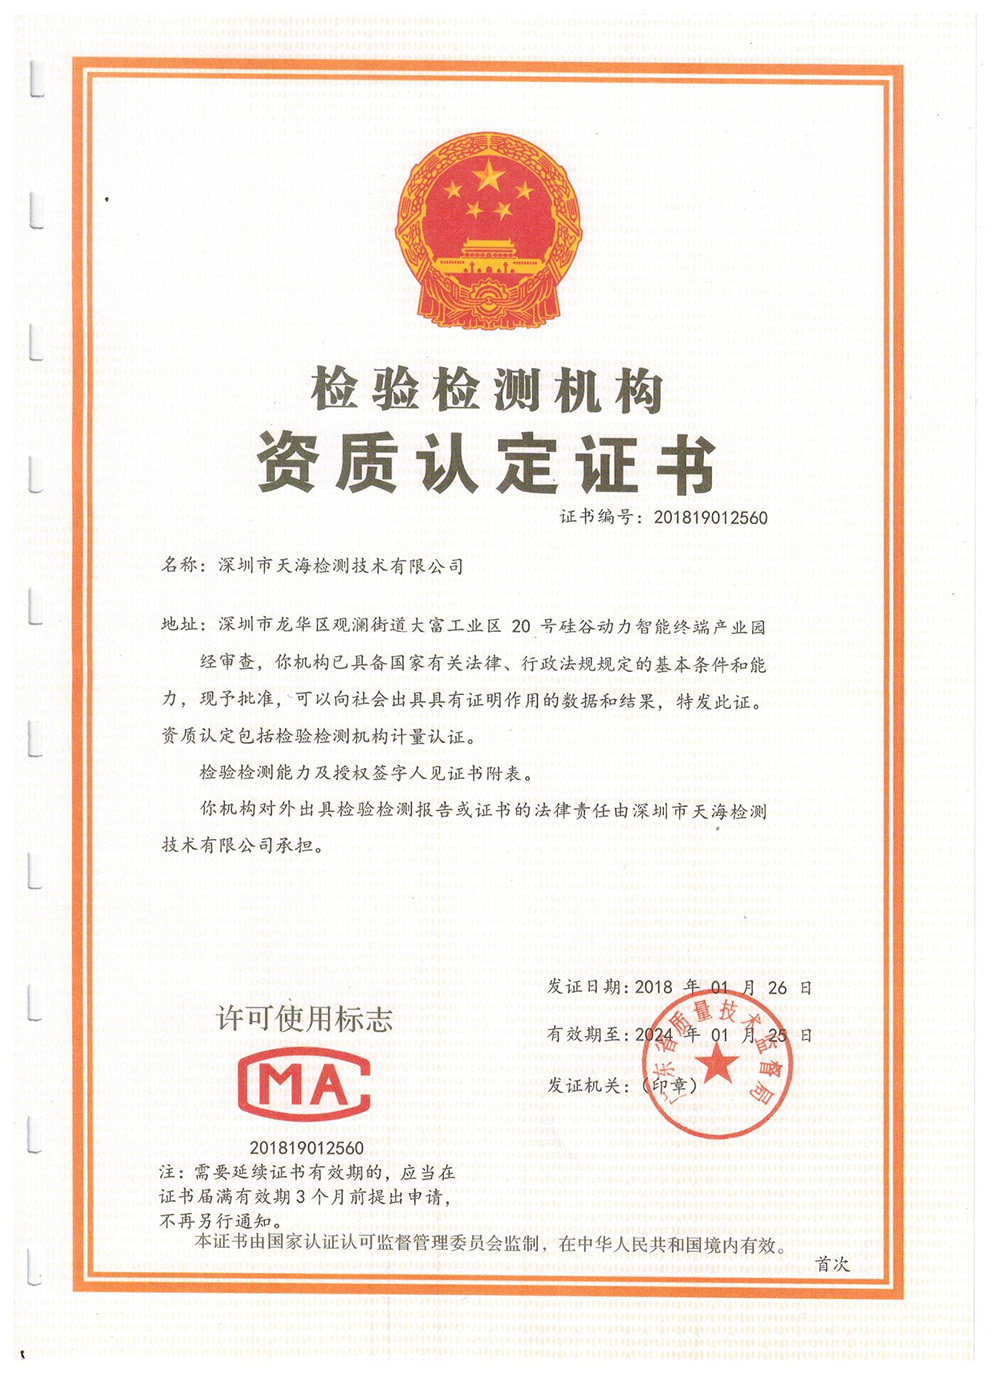 Qualification Certificate of testing institution